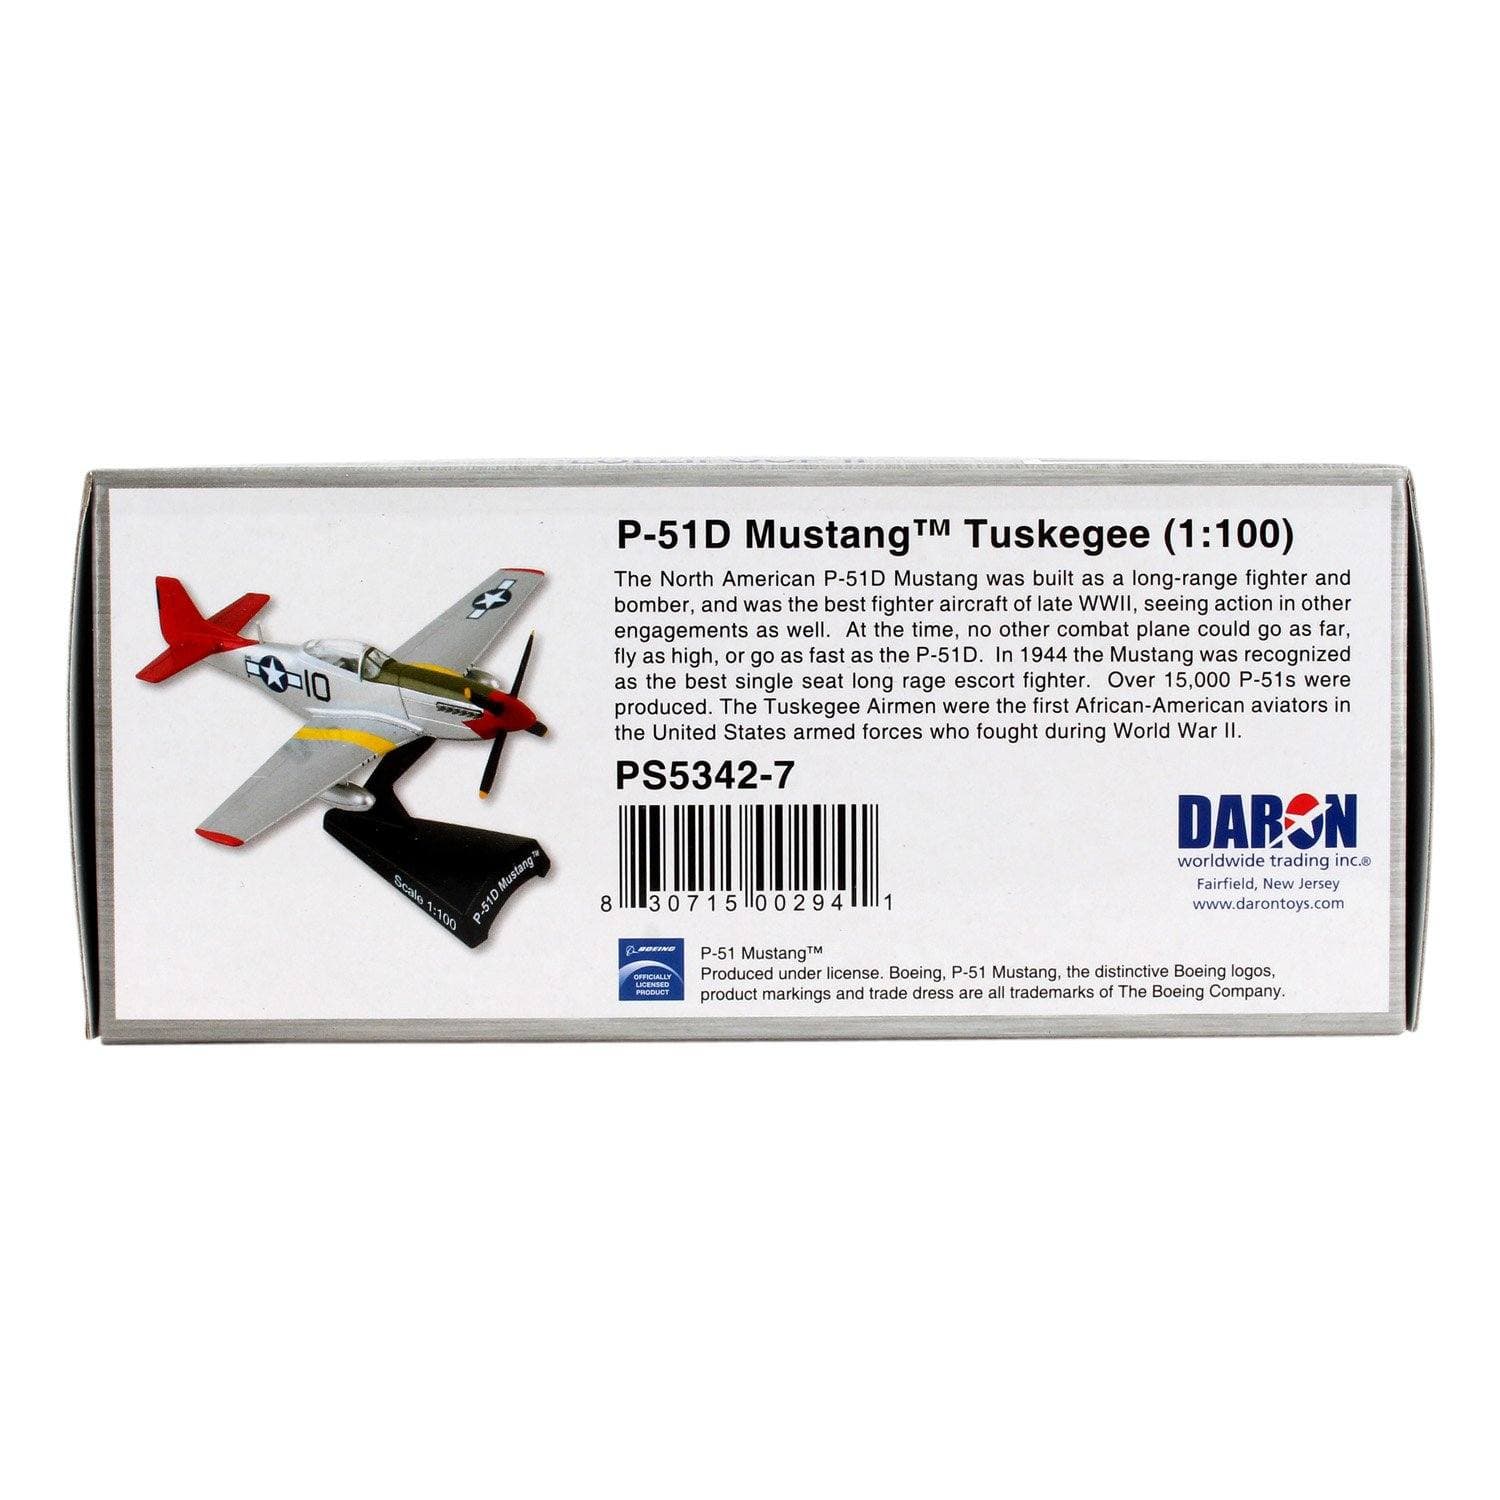 Postage Stamp P-51D Mustang Tuskegee 1/100 - PilotMall.com